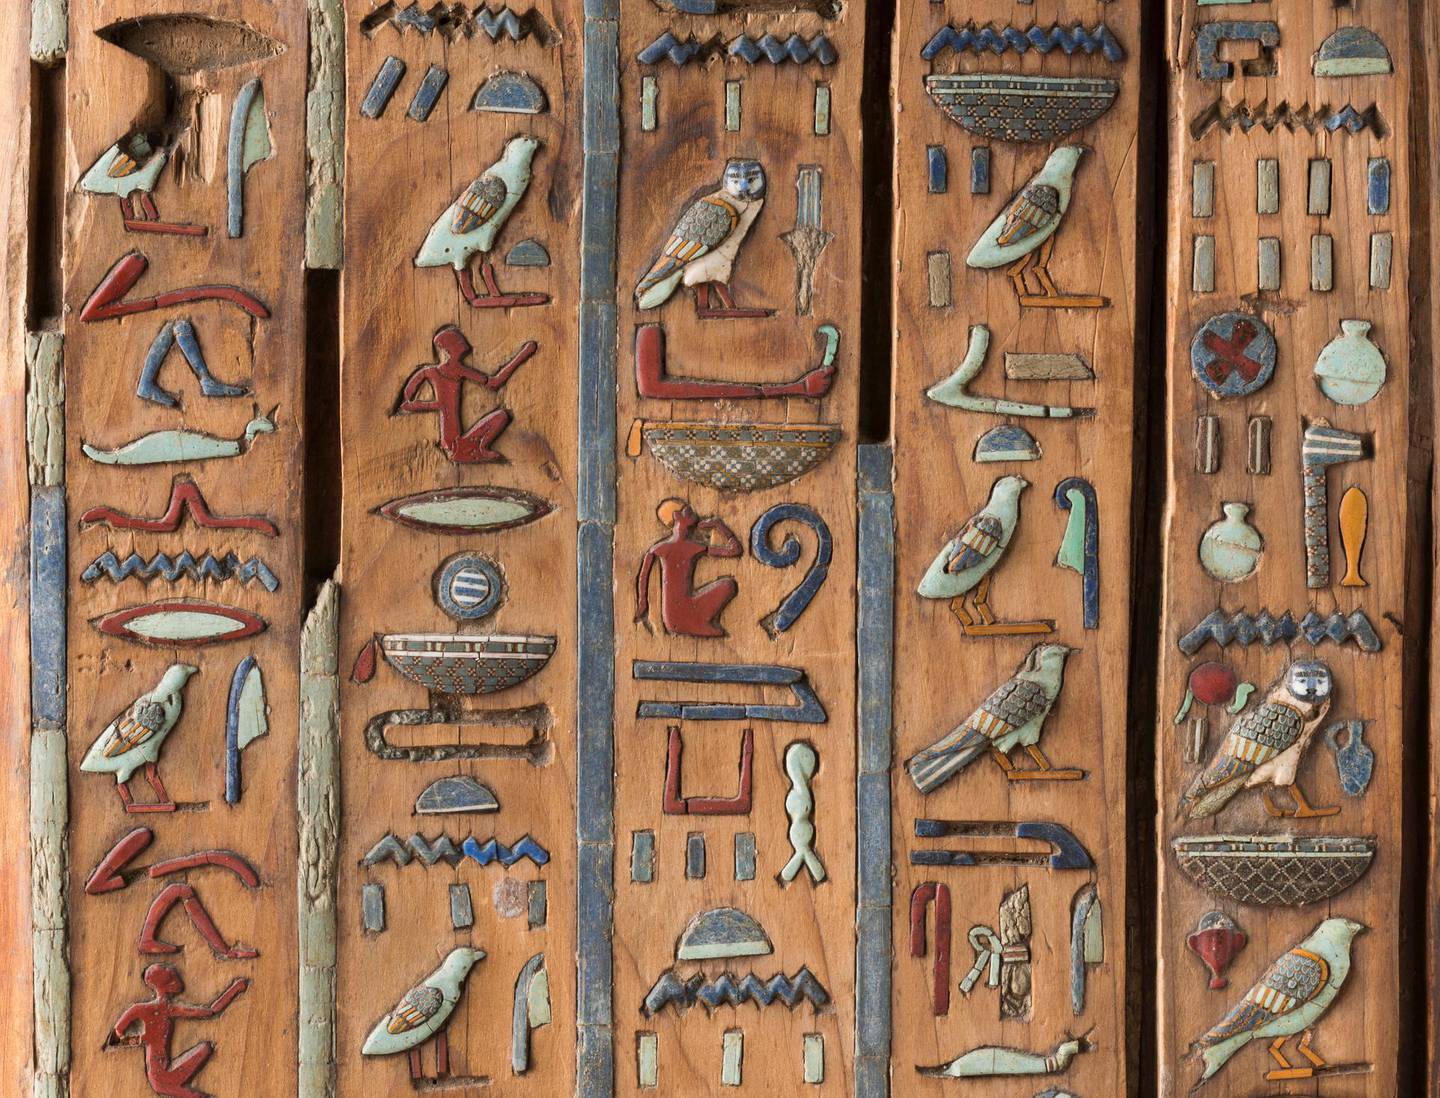 A detail from the sarcophagus of Djed-Thoth-iu-ef-ankh. Courtesy Scribit